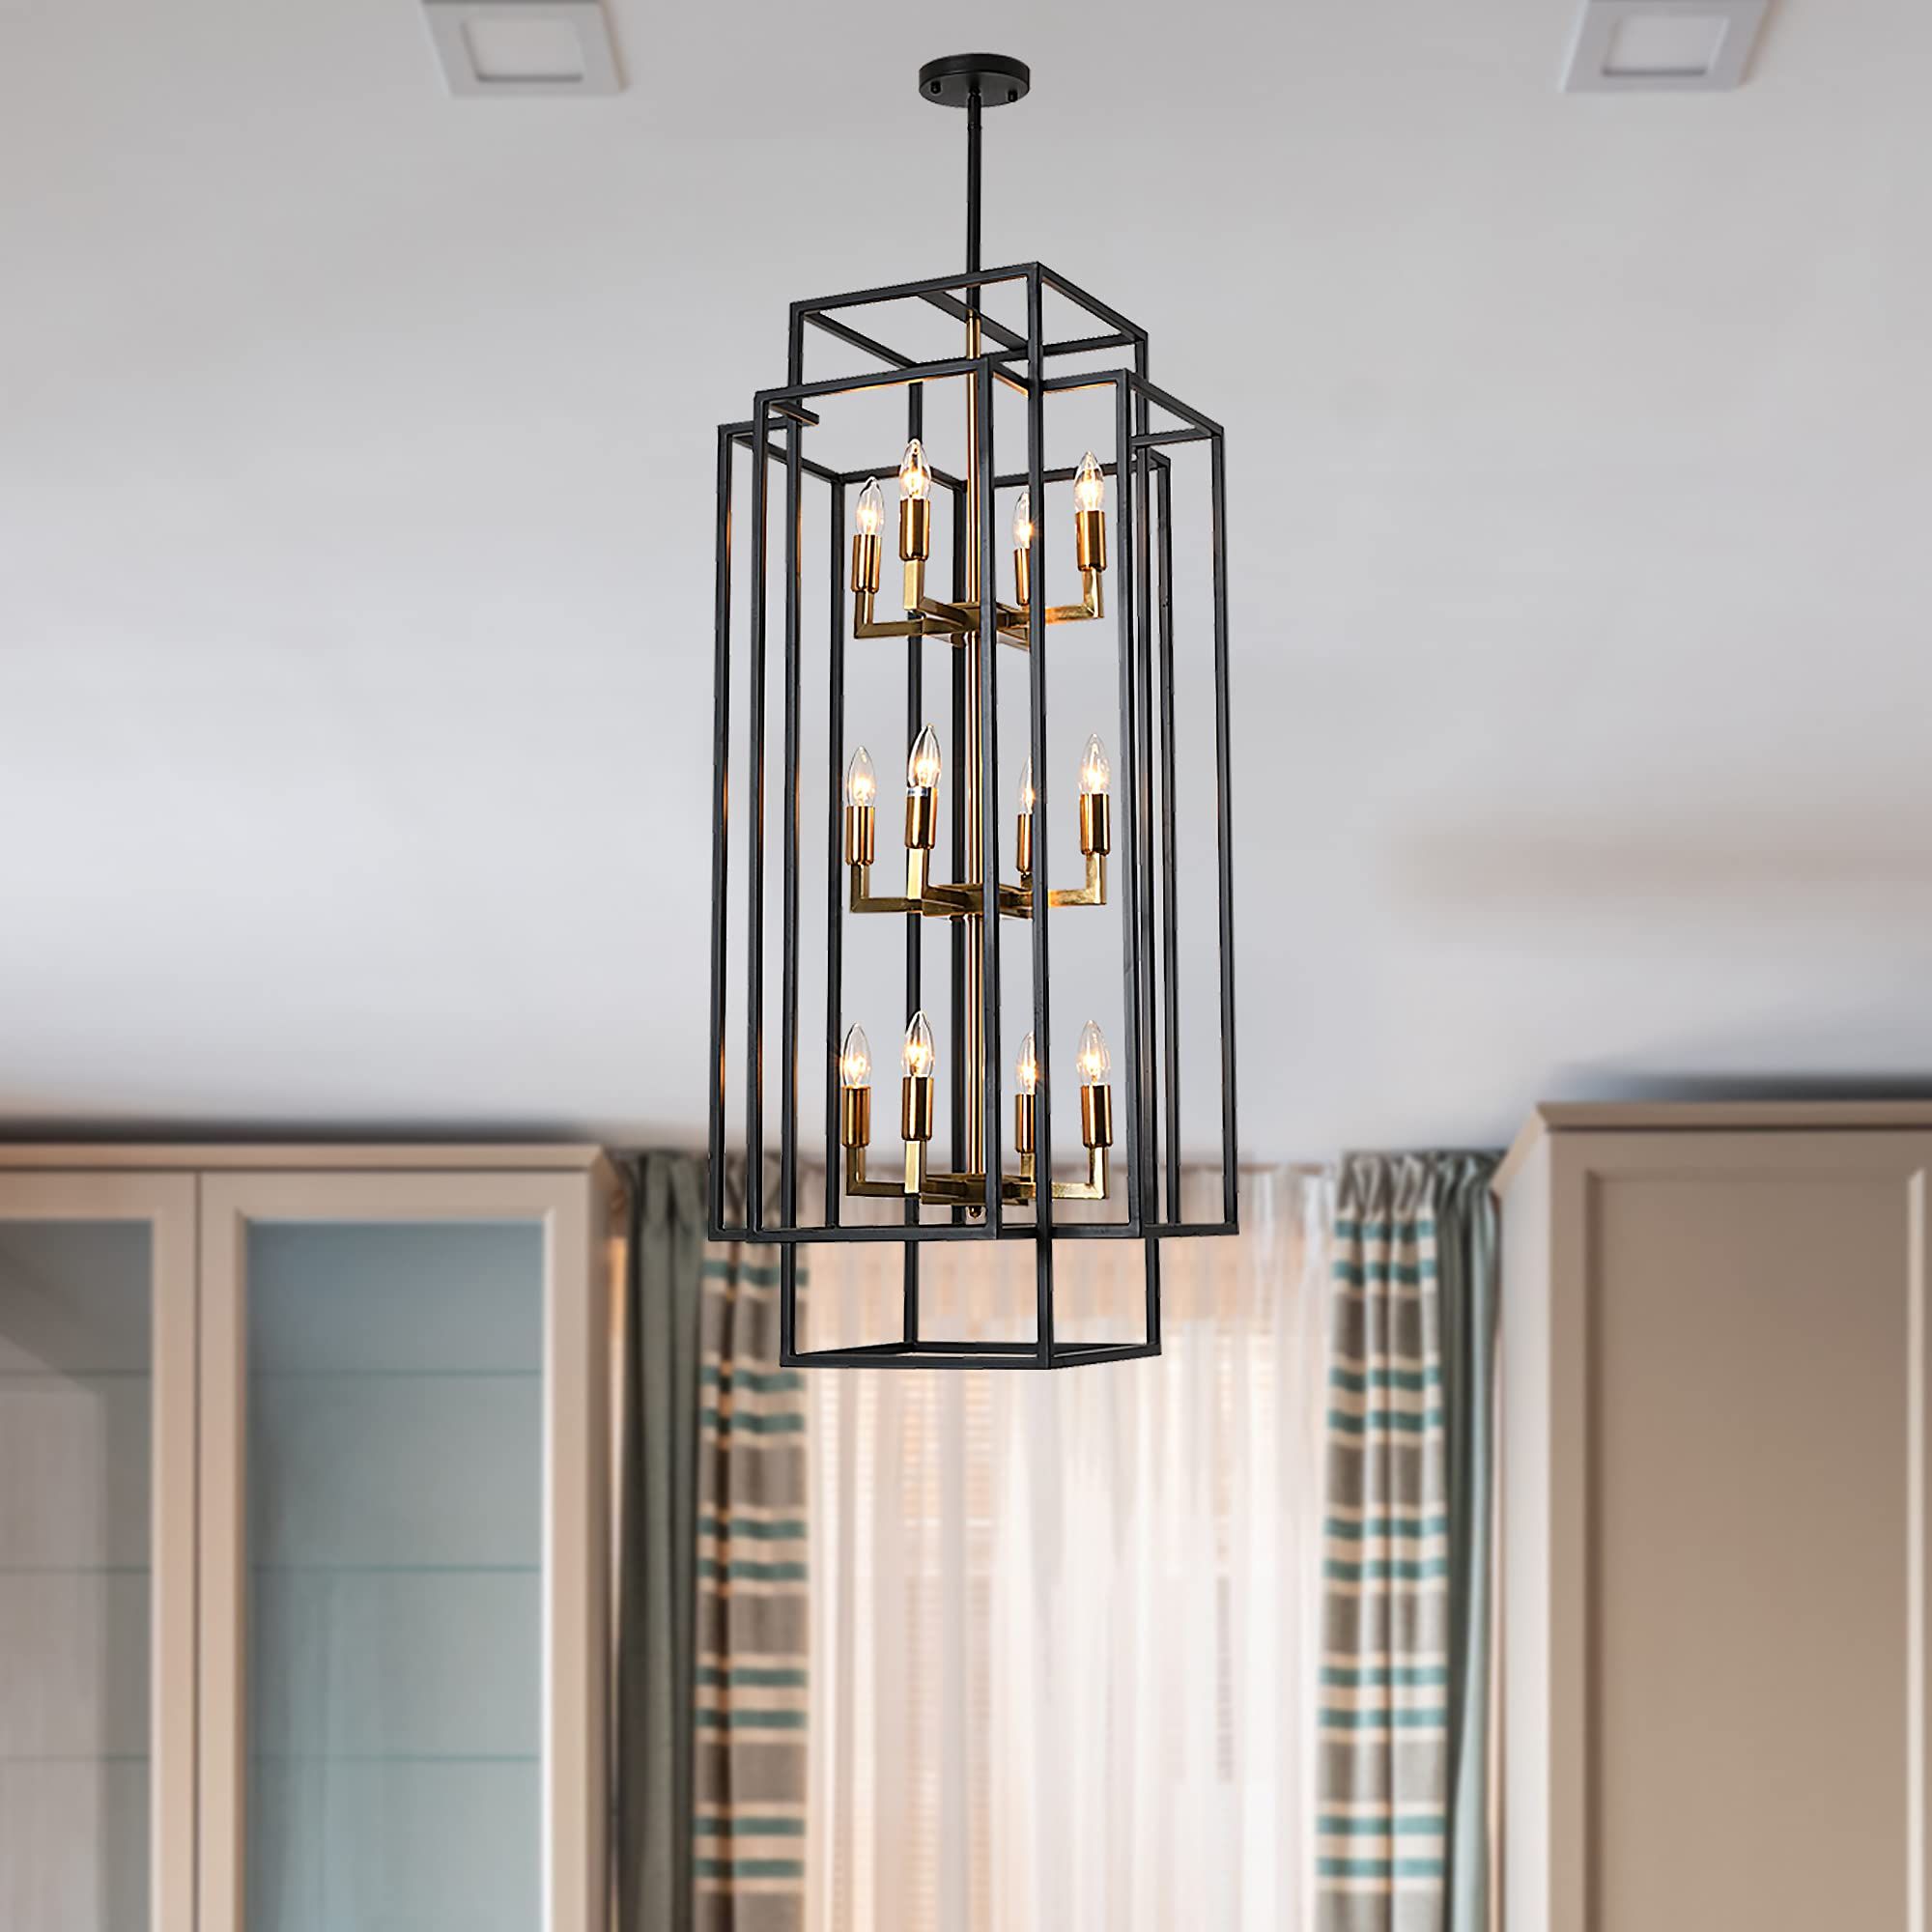 12 Light Lantern Chandeliers Regarding Fashionable J And E Home 12 Light Lantern Tiered Pendant Light Fixtures,island Light,hall  Foyer Hanging Chandelier,wrought Iron Finish For Kitchen Island Farmhouse  Entryway, Black+antique Brass – – Amazon (View 1 of 15)